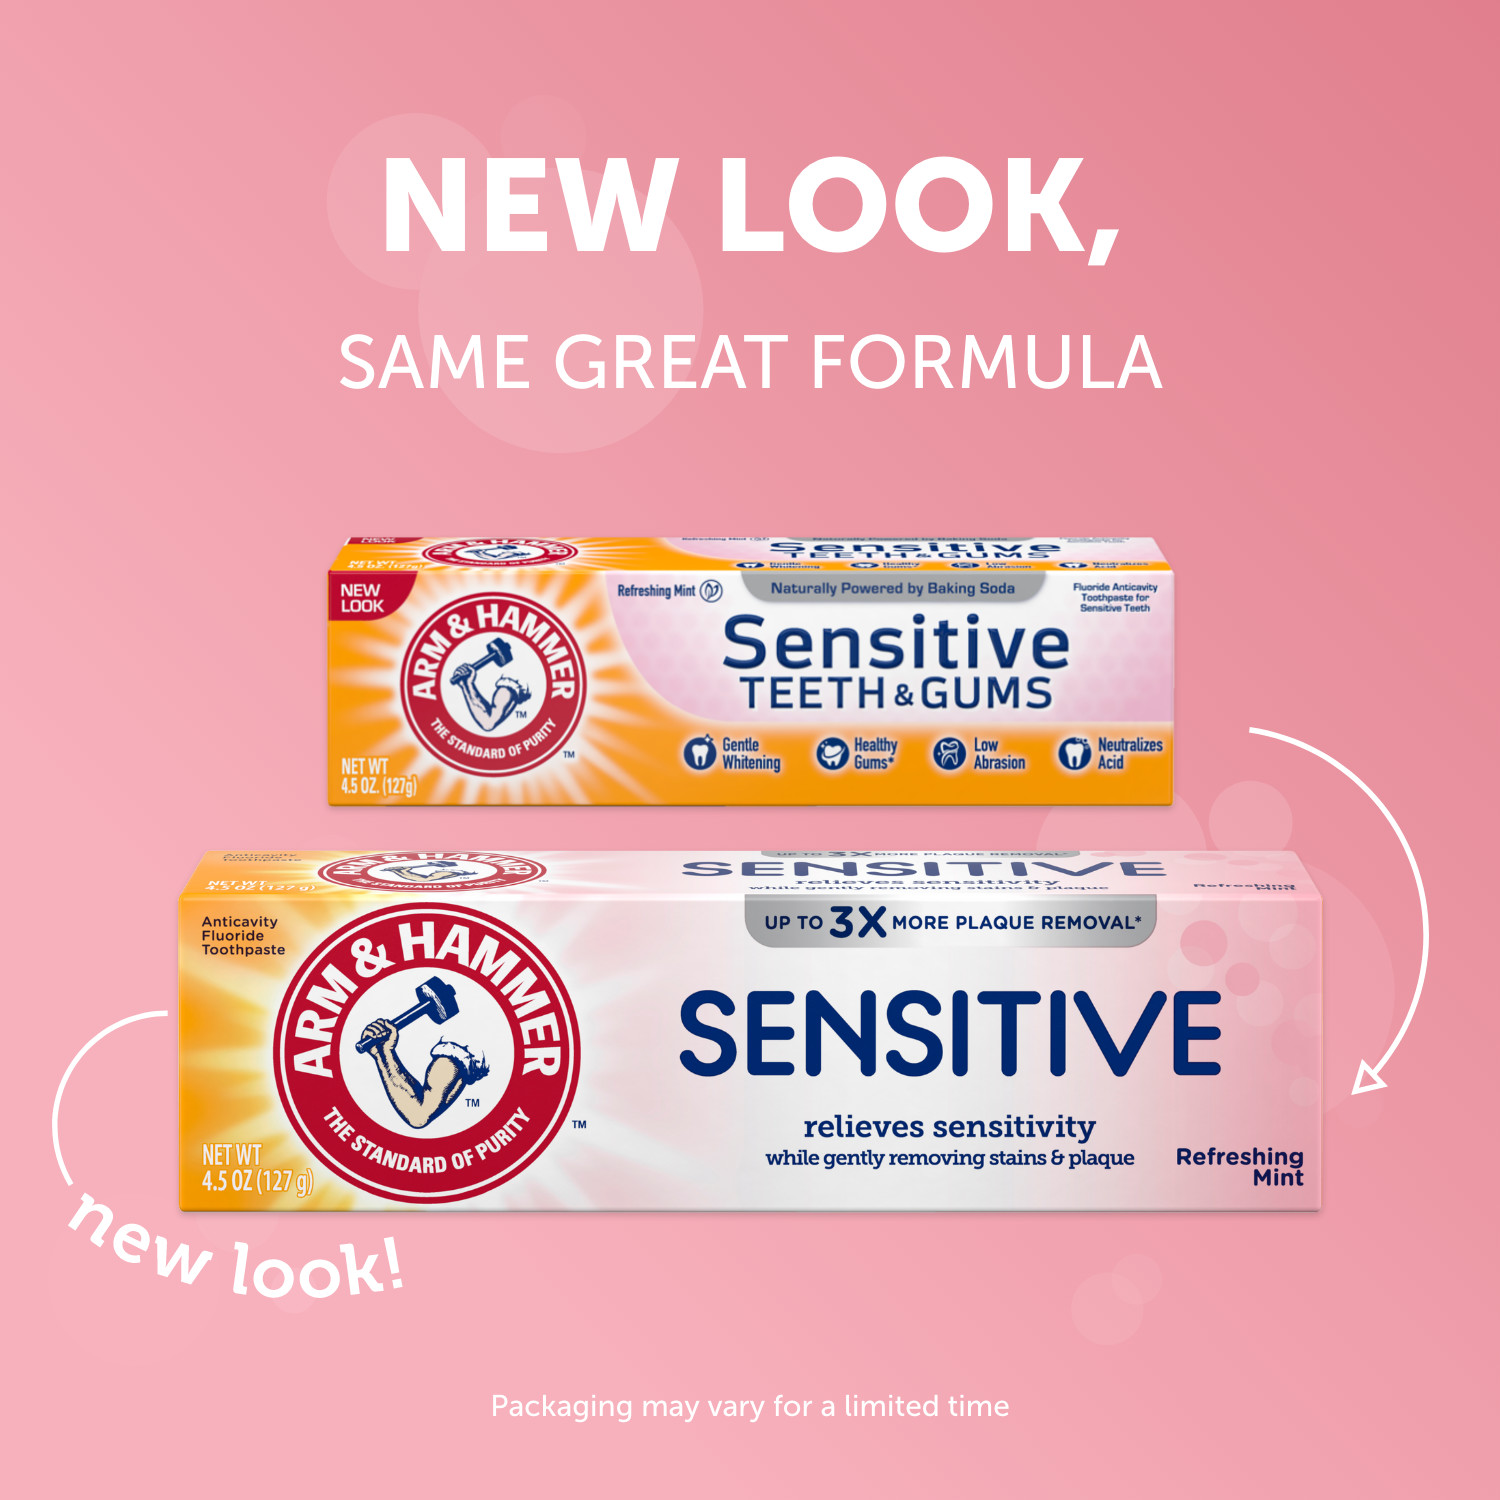 ARM & HAMMER Sensitive Teeth & Gums Toothpaste, Refreshing Mint- Fluoride Toothpaste - image 4 of 10